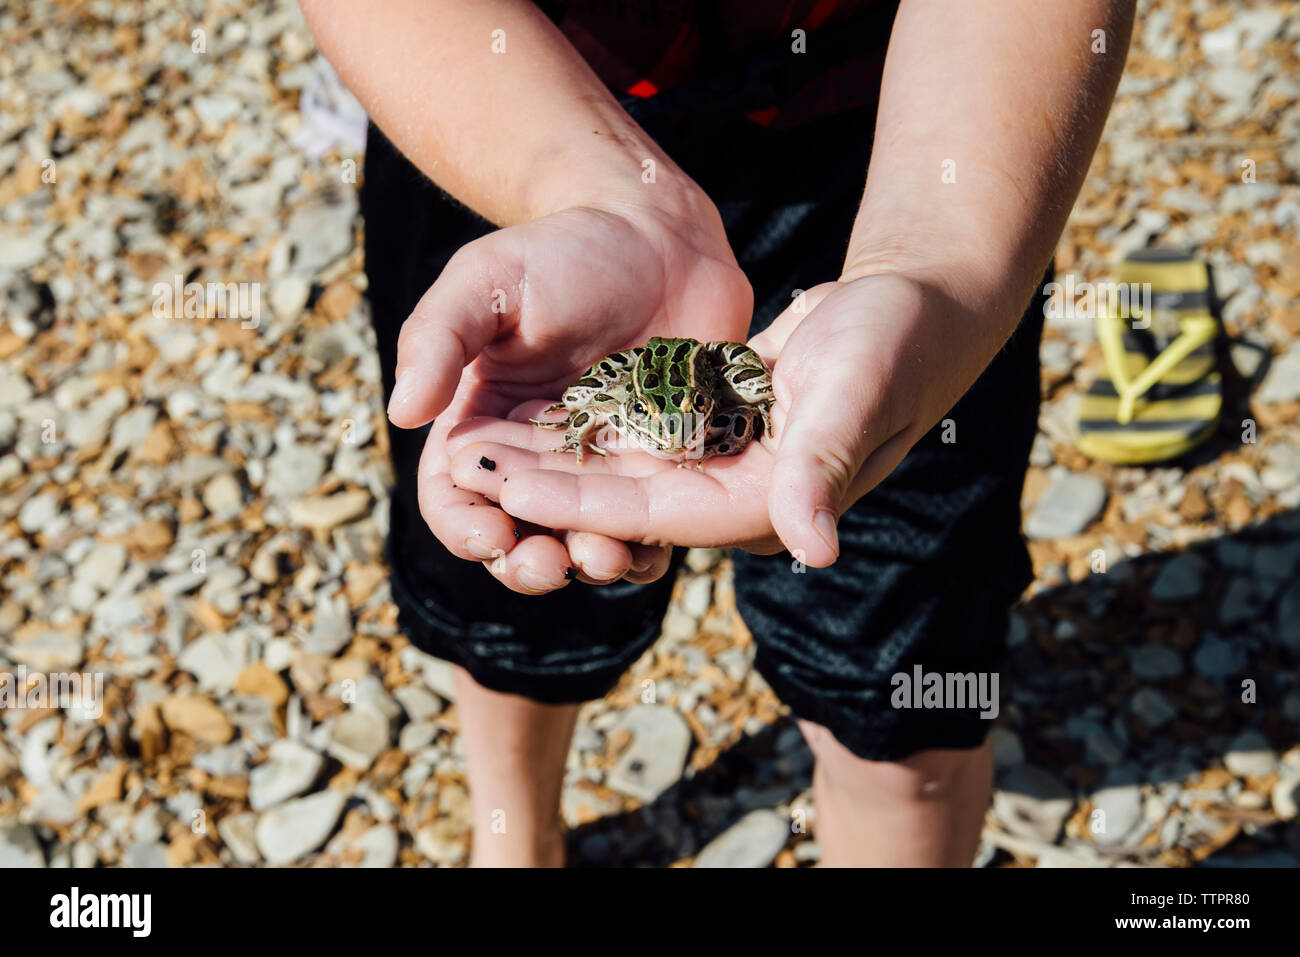 Midsection of boy holding frog while standing on field Stock Photo